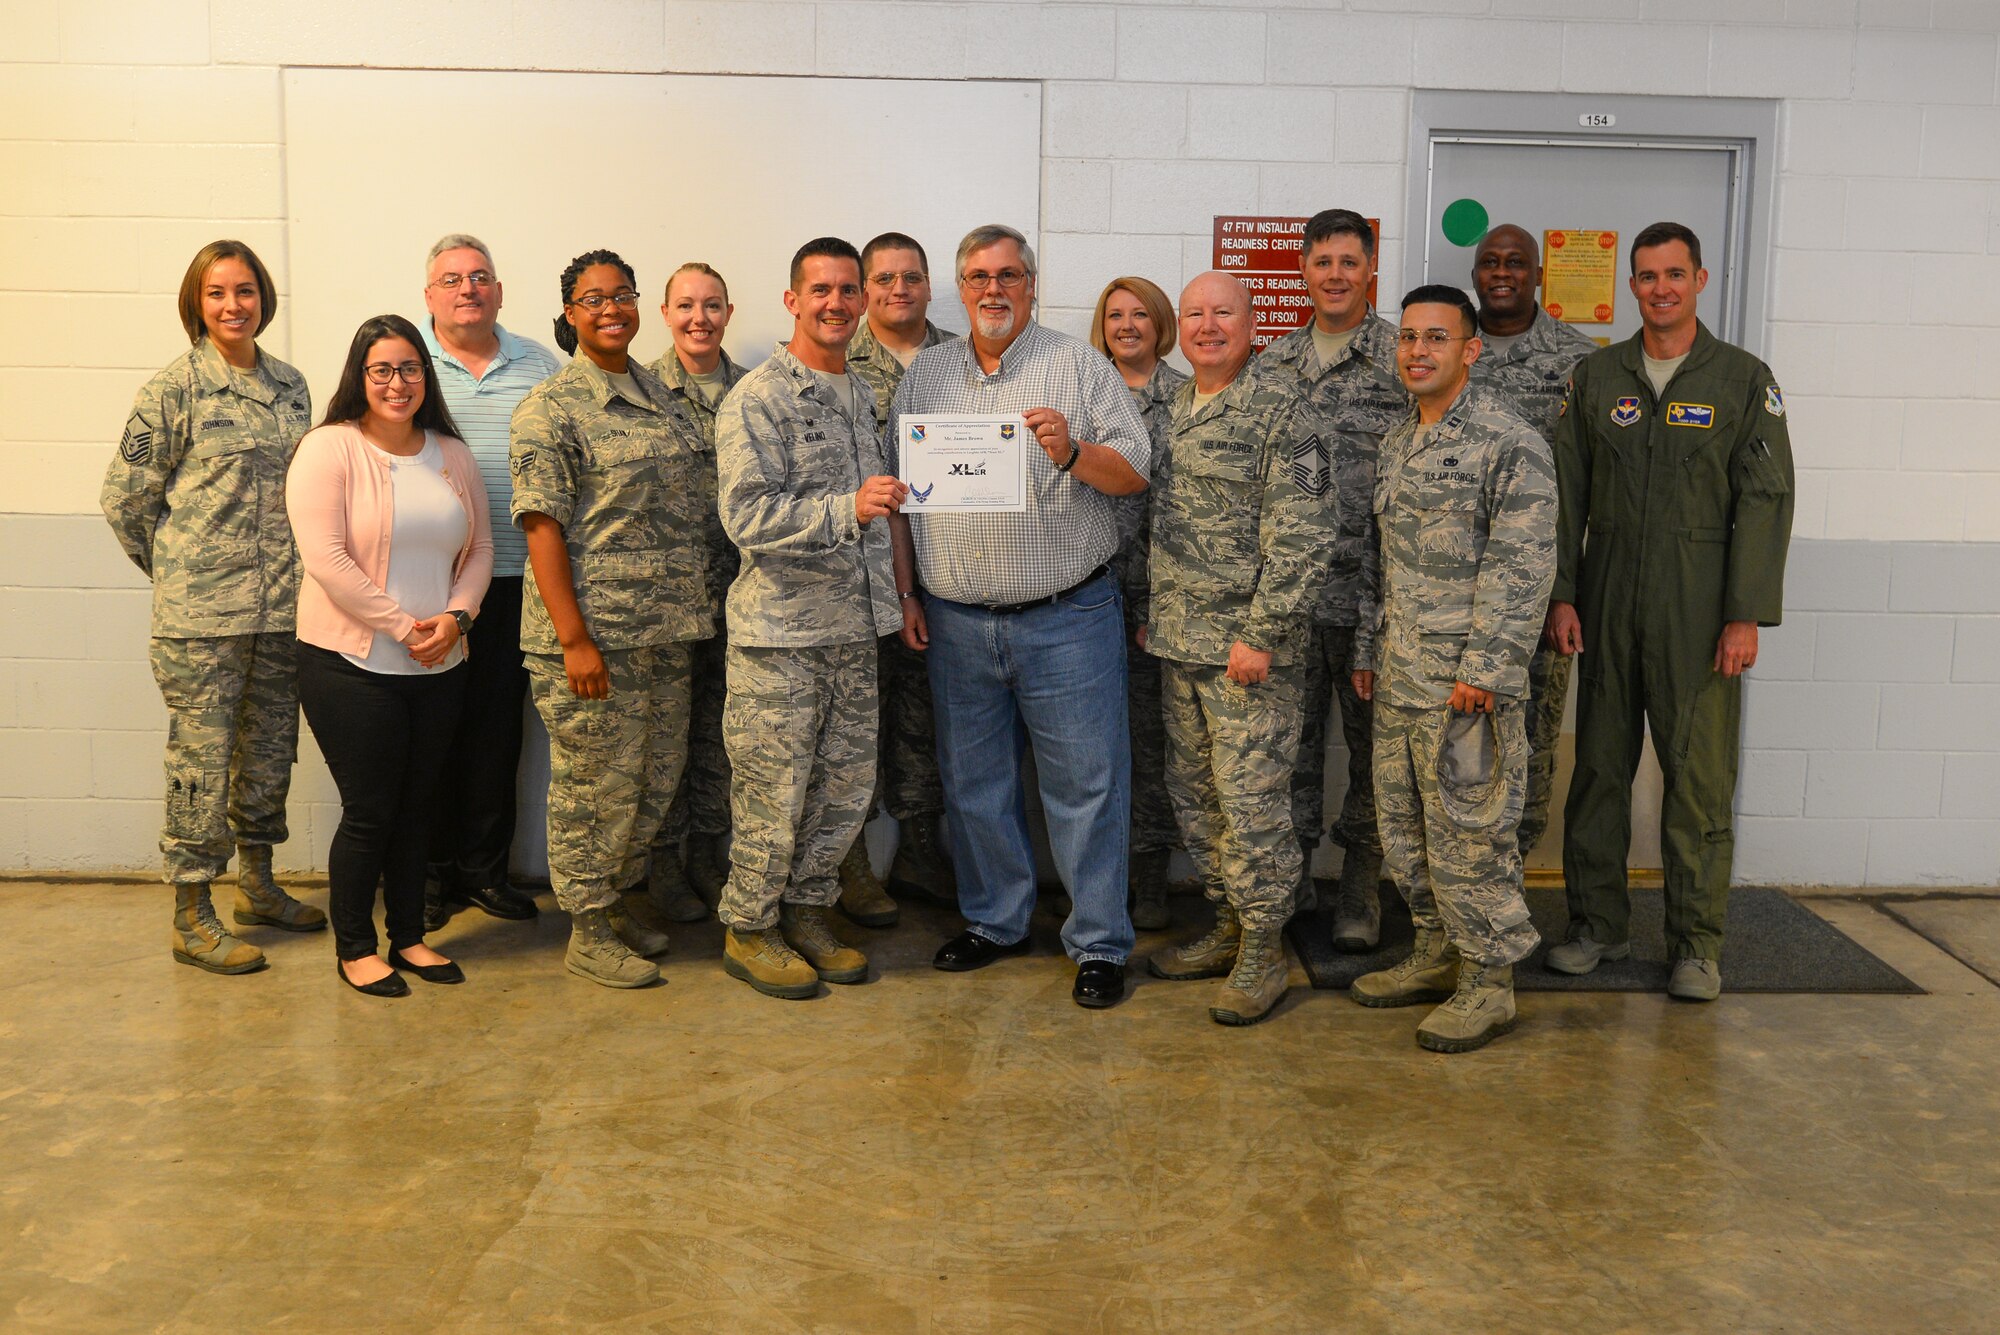 James Brown, 47th Logistics Readiness Flight installation deployment officer, was chosen by wing leadership to be the “XLer” of the week, for the week of August 13, 2018, at Laughlin Air Force Base, Texas. The “XLer” award, presented by Col. Charlie Velino, 47th Flying Training Wing commander, is given to those who consistently make outstanding contributions to their unit and the Laughlin mission. (U.S. Air Force photo by Senior Airman Benjamin N. Valmoja)